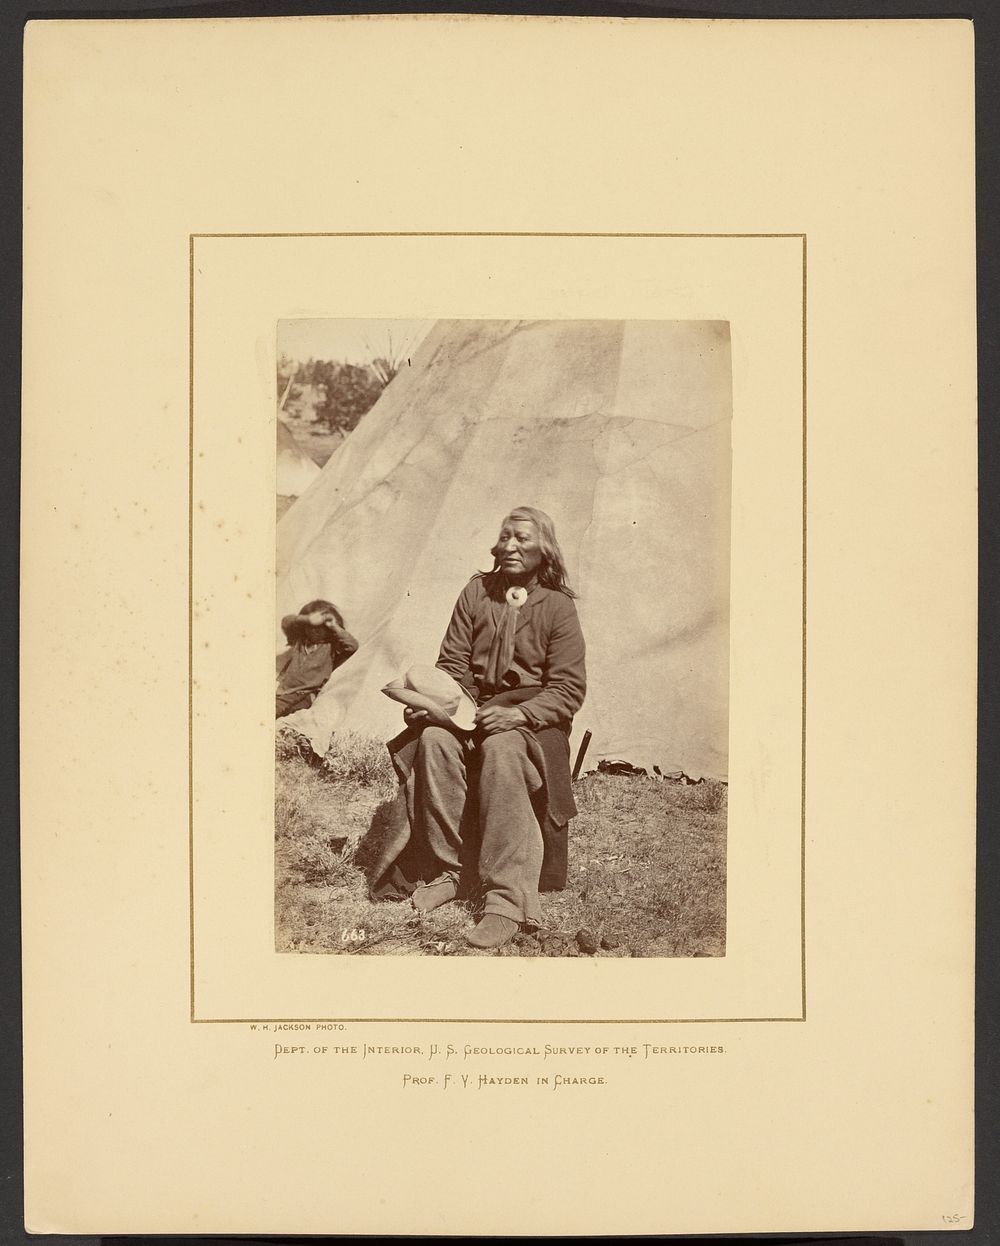 Washakie or Shoots the Buffalo Running, Shoshone, Wind River Mountains, Wyoming by William Henry Jackson